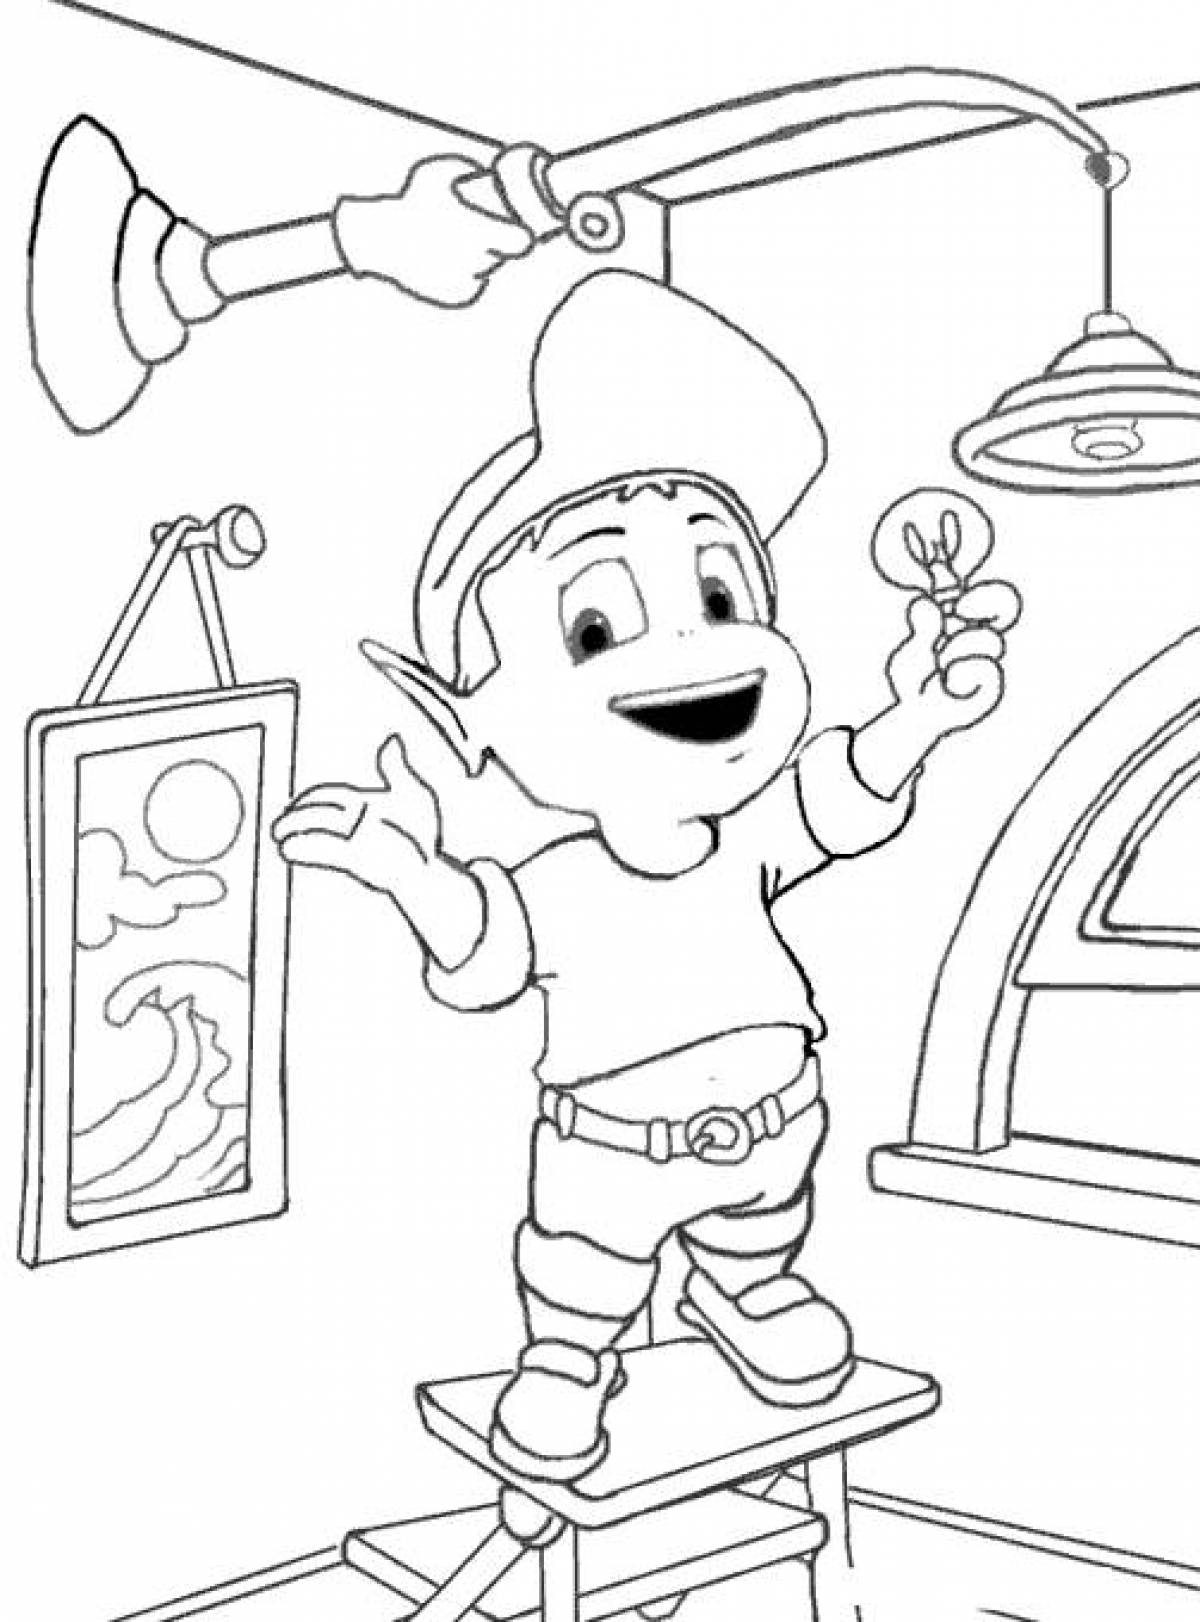 Light bulb coloring page